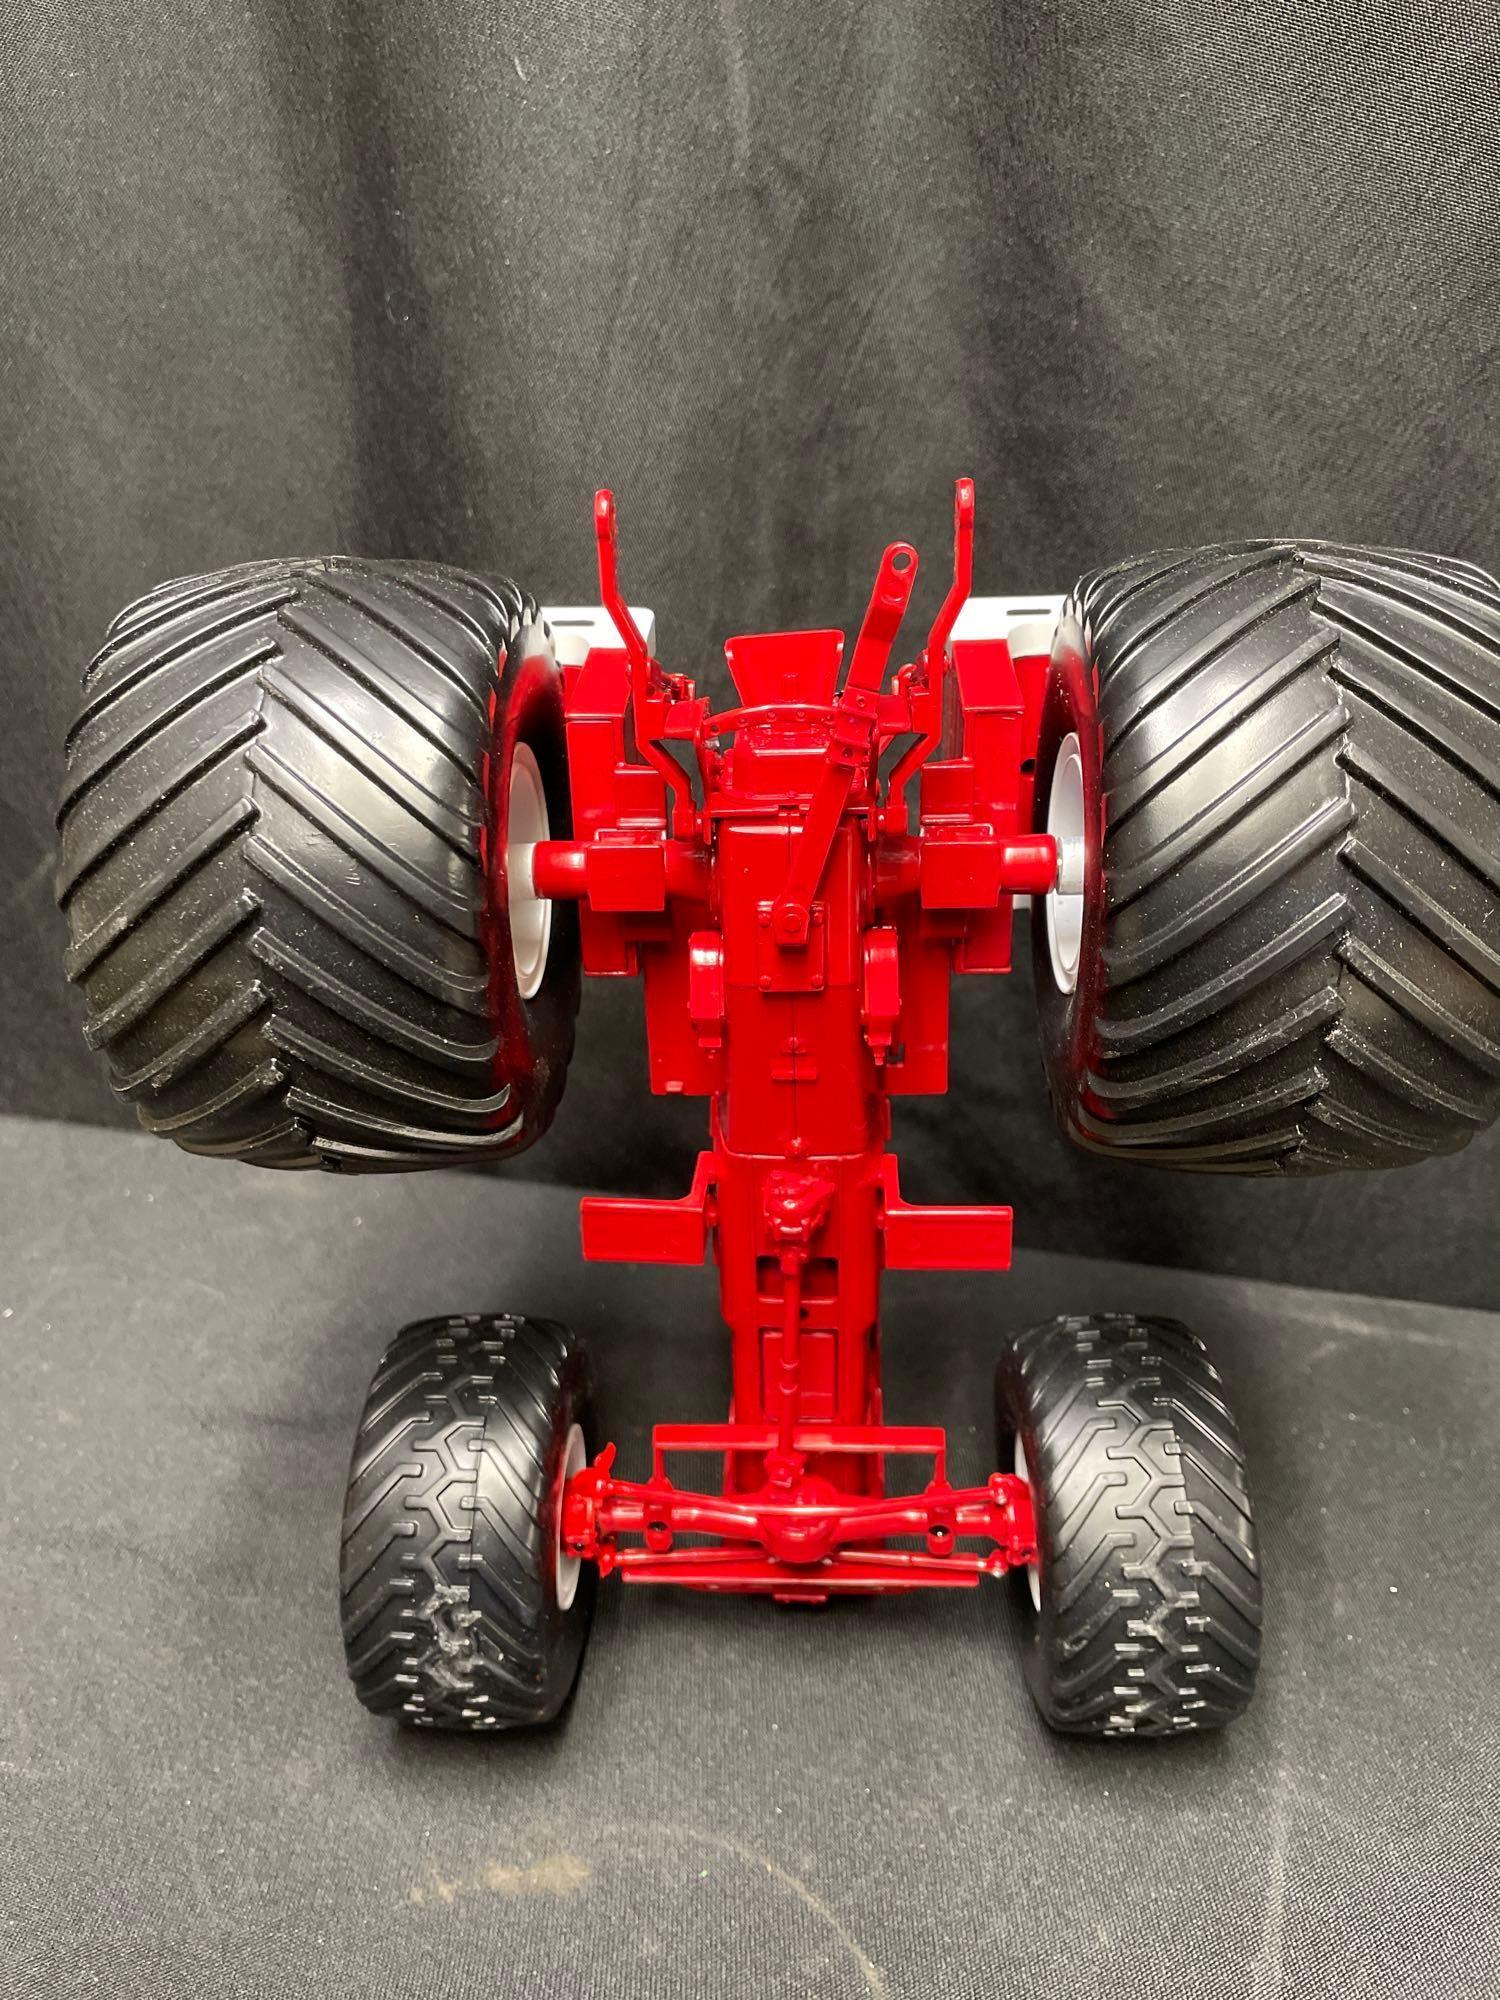 1/16th Scale Factory Terra Tire Cockshutt 1800 Tractor w/3 pt., Fenders, large wide tires